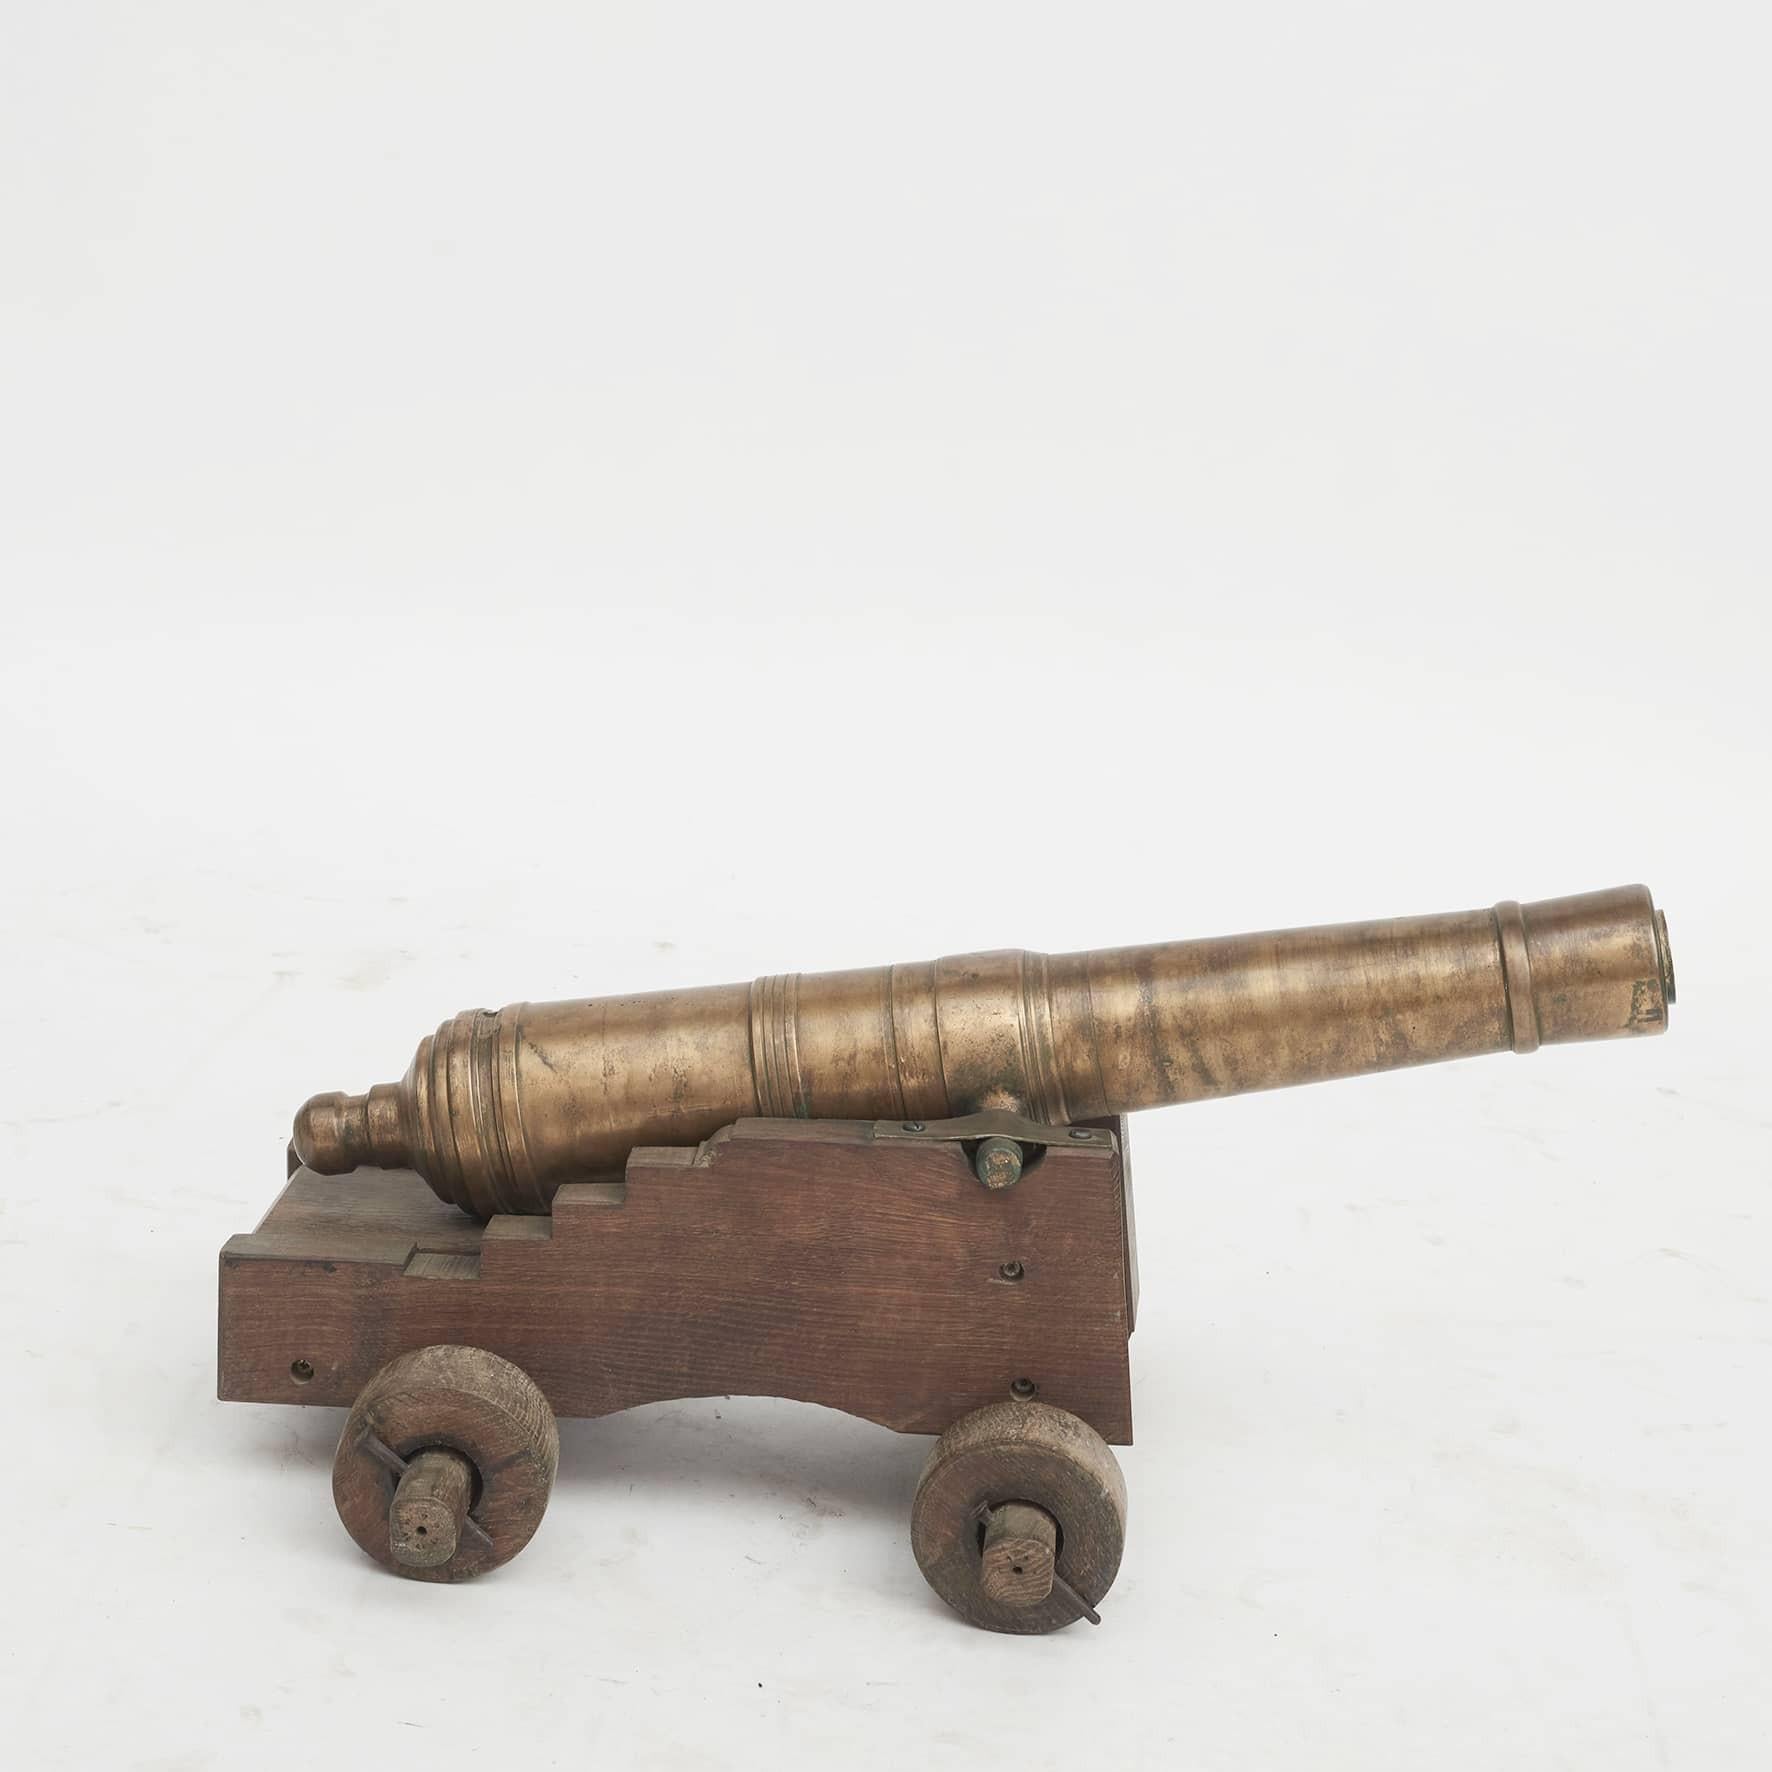 Signal cannon with a brass barrel set into an oak wood carriage.
Denmark 1840-1860.
 